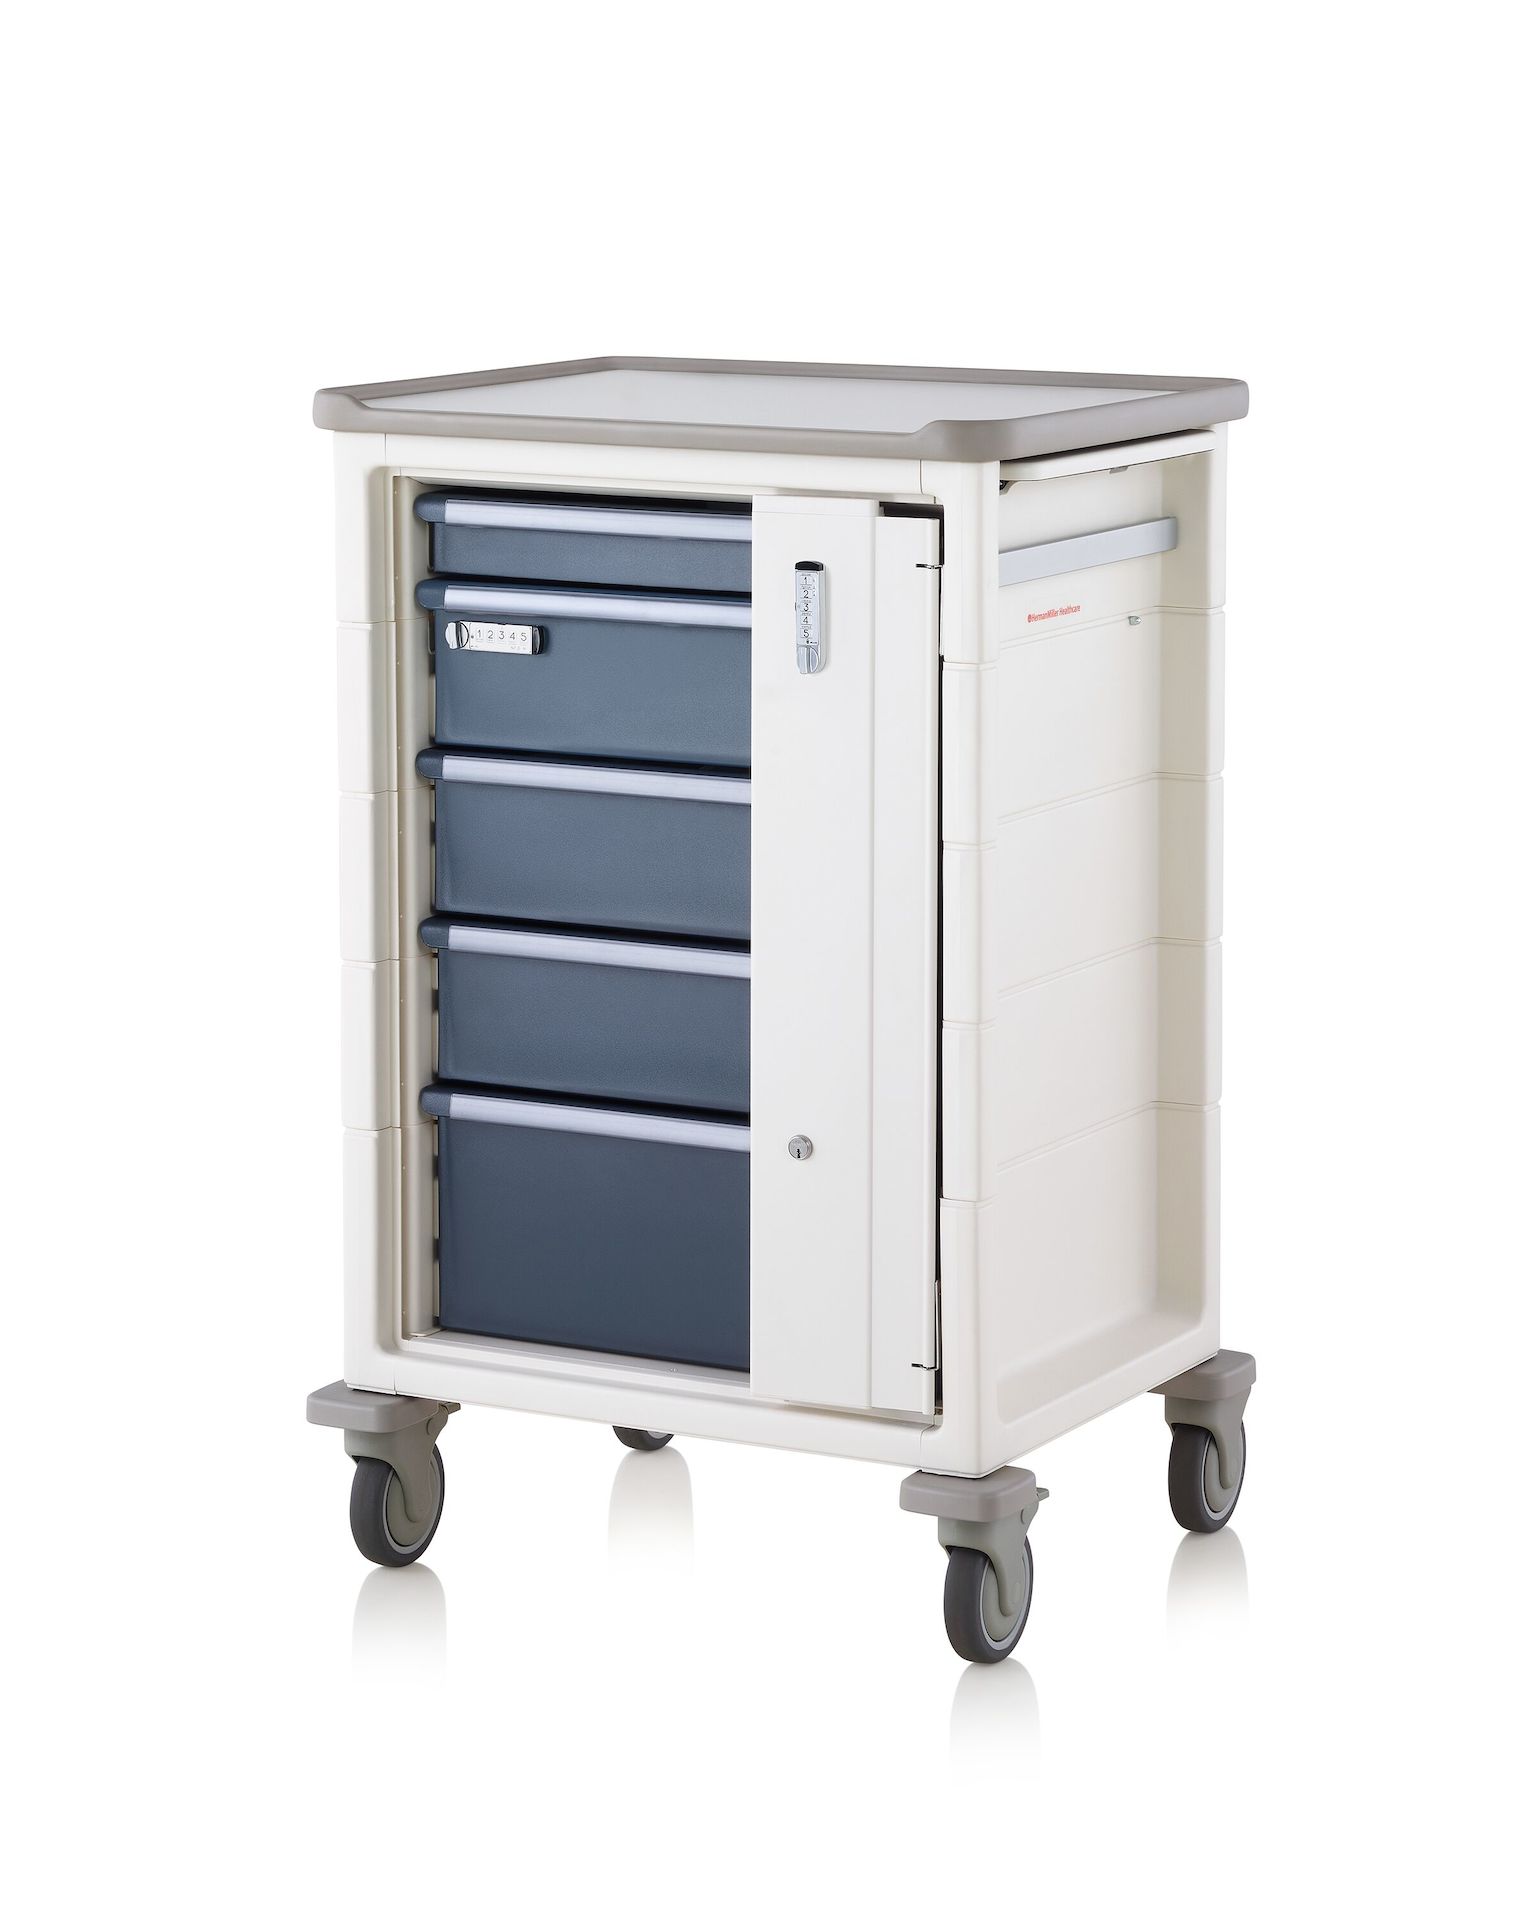 A single healthcare cart with keyless lock on both the cart and a single drawer.